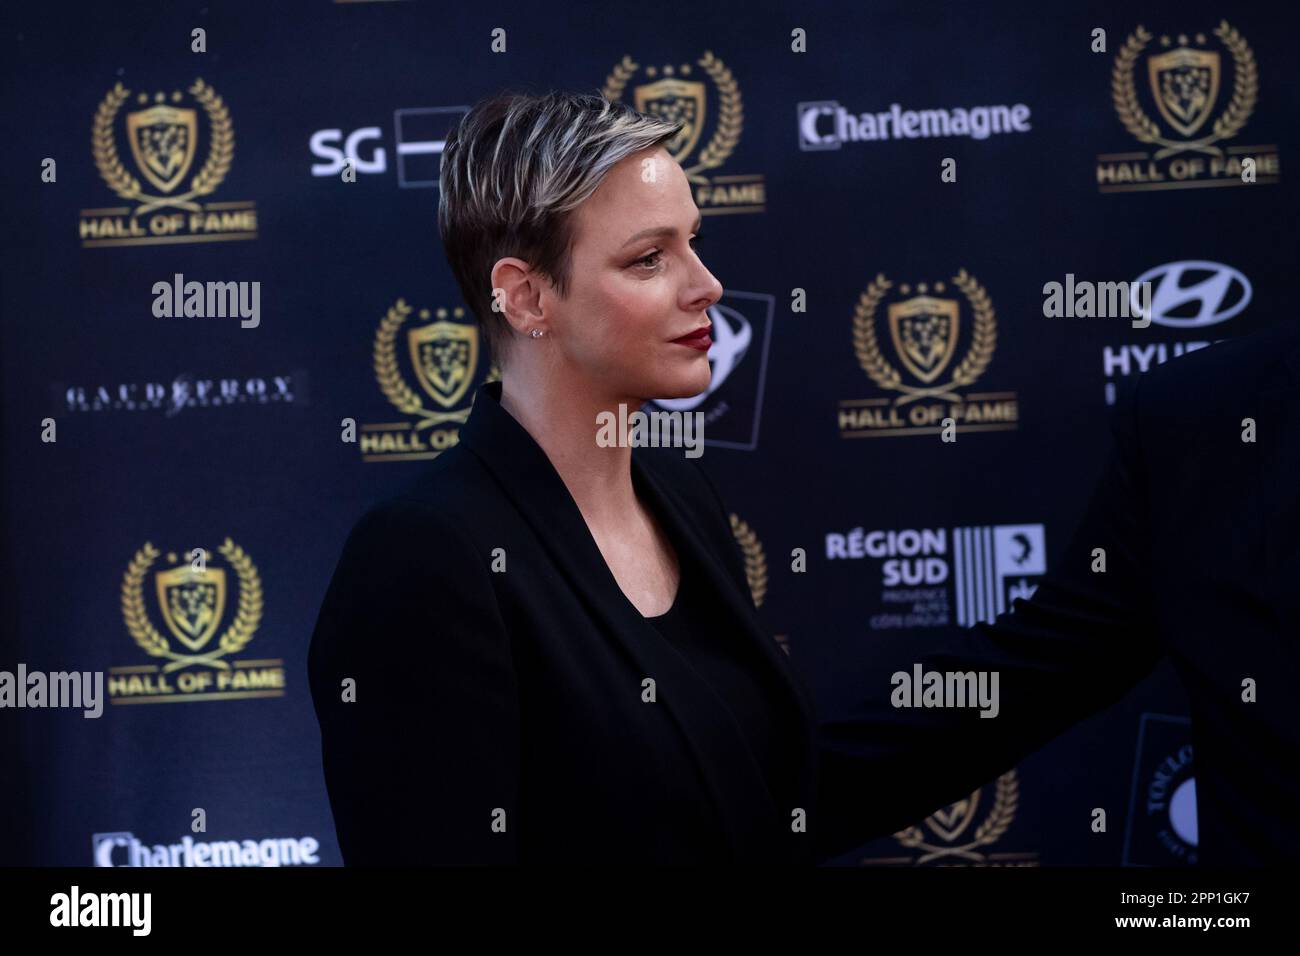 Princess Charlene de Monaco arrives to the first Rugby Club Toulonnais Hall of Fame ceremony. The Rugby Club Toulonnais (RCT) presents the first Rugby Hall of Fame by inducting eight players during a gala evening at the Zenith of Toulon. Stock Photo